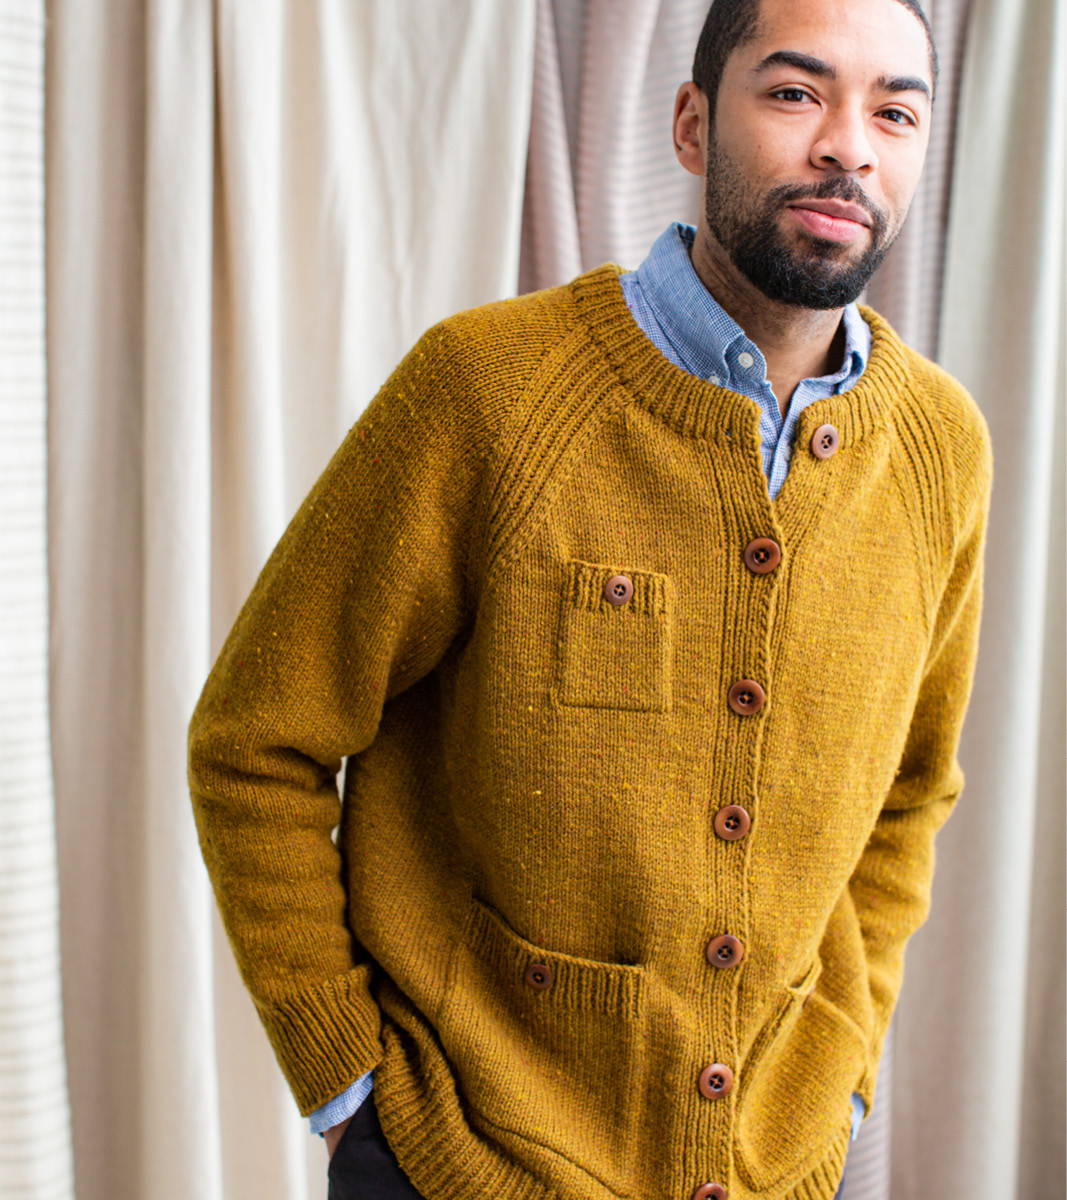 Anthony modeling First Cardigan Sweater sample in Warbler with fold-over neckband